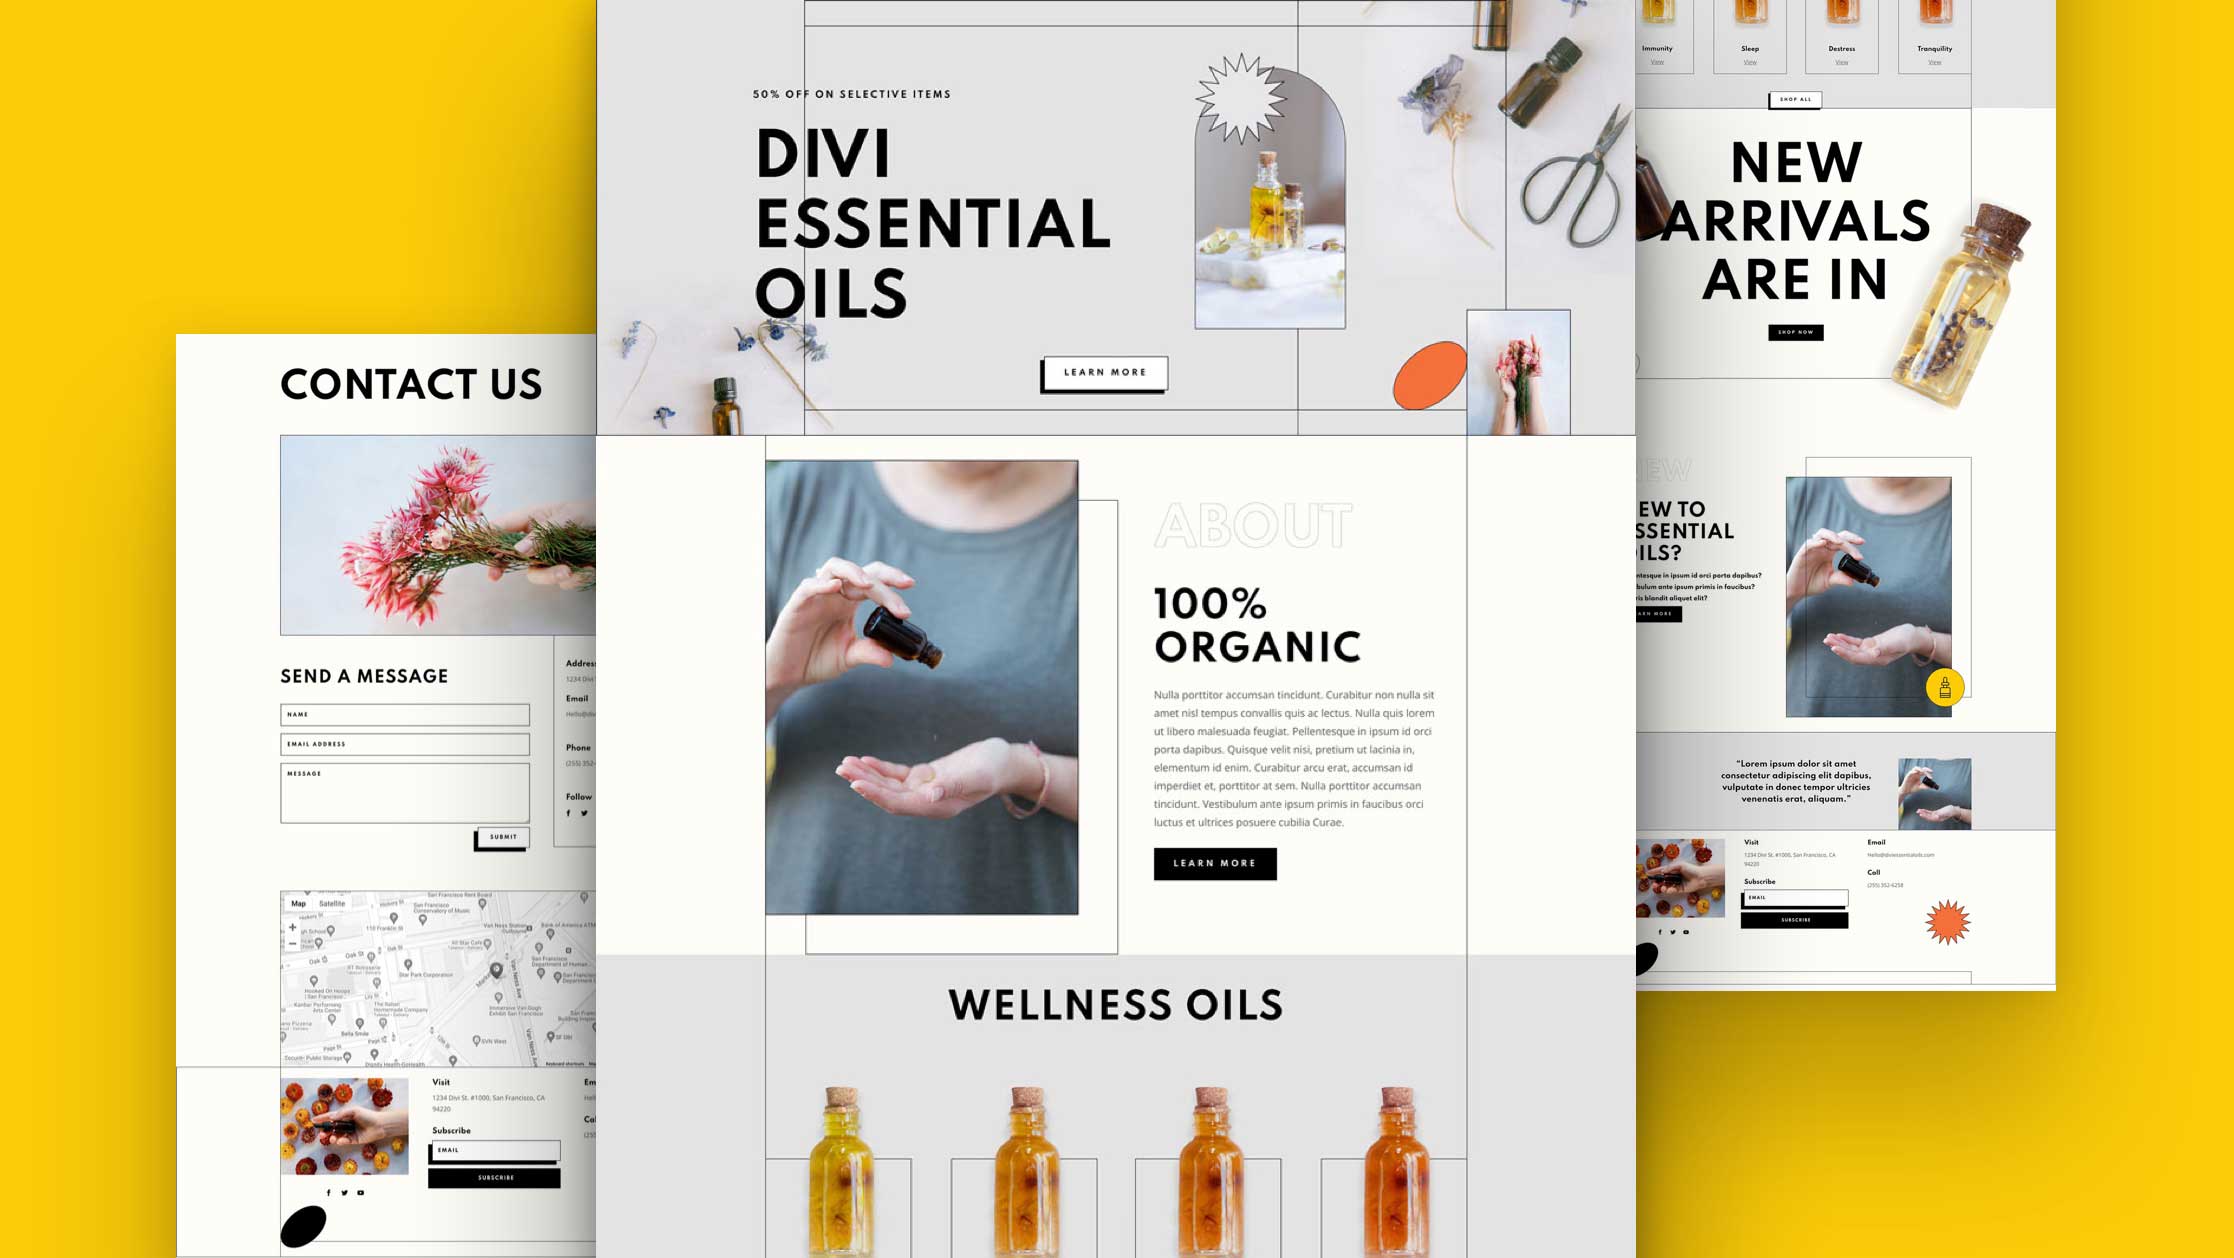 Get a FREE Essential Oils Layout Pack for Divi